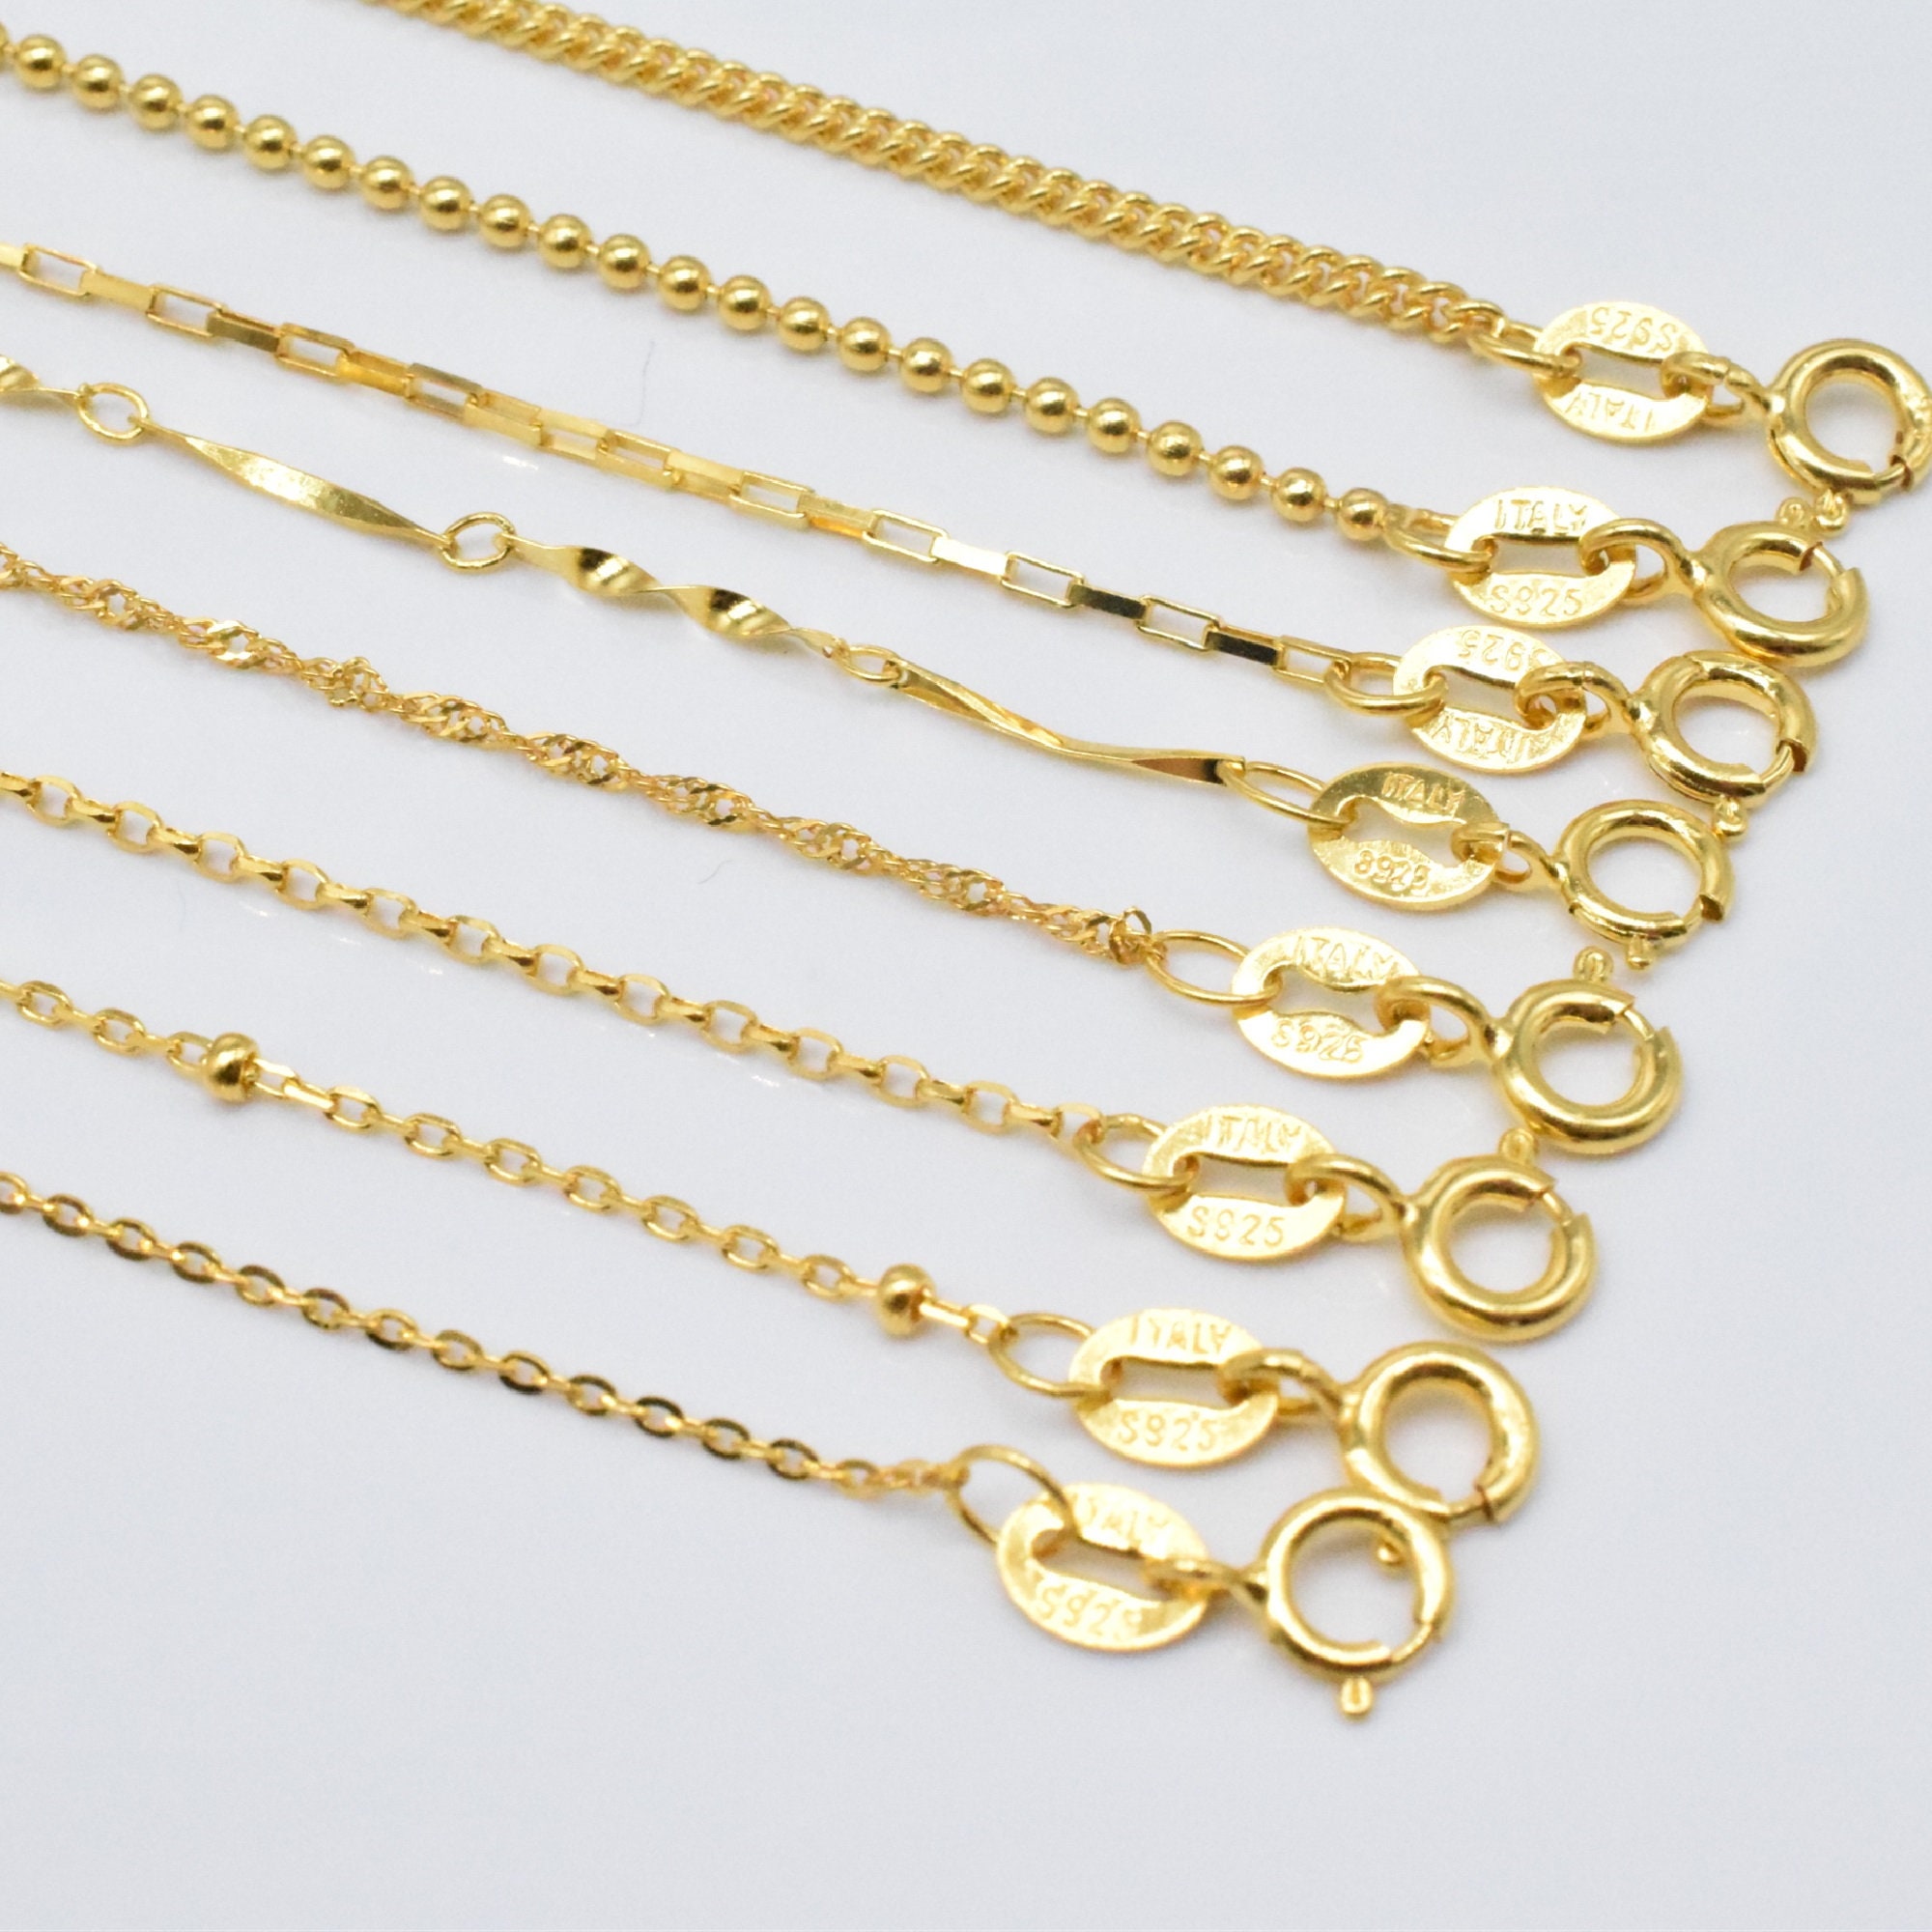 Buy Rope Chain 14K Yellow Gold Clad Solid Sterling Silver 925 All Sizes  Online in India - Etsy